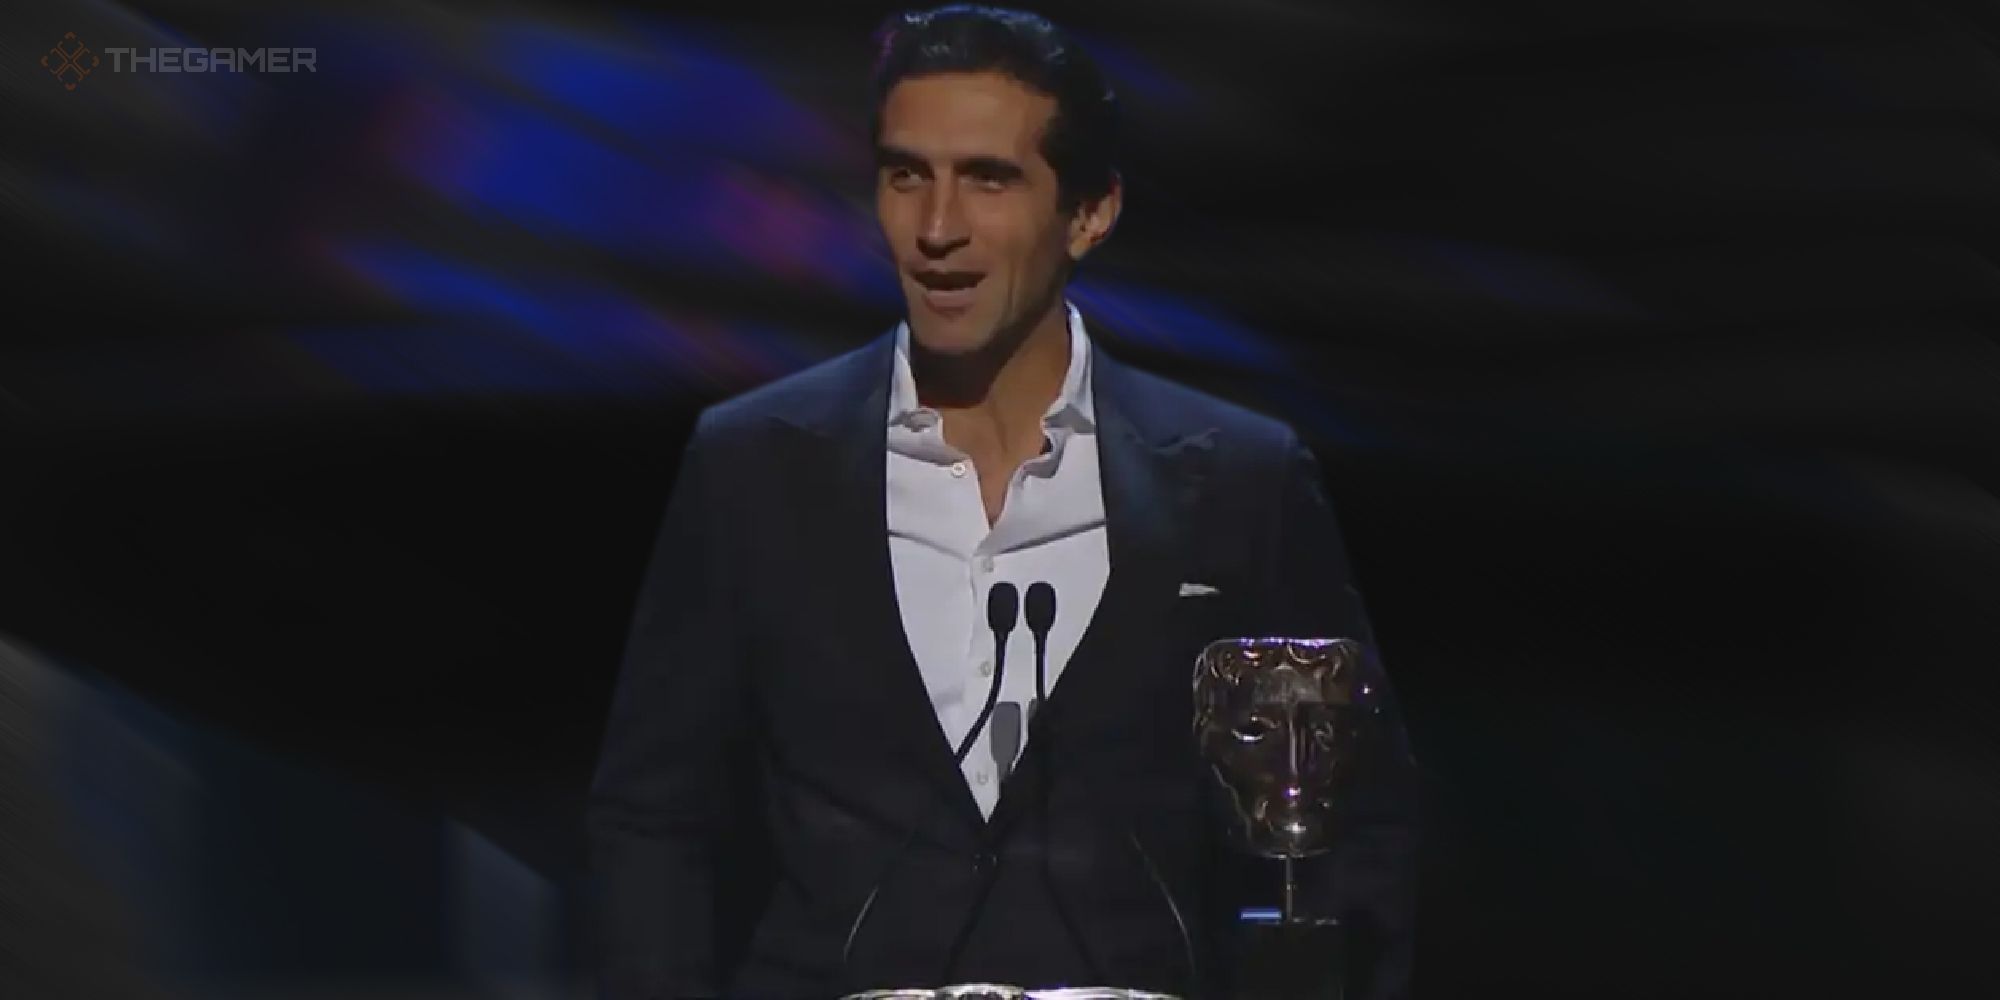 It Takes Two Easter Egg Features Famous Josef Fares Rant